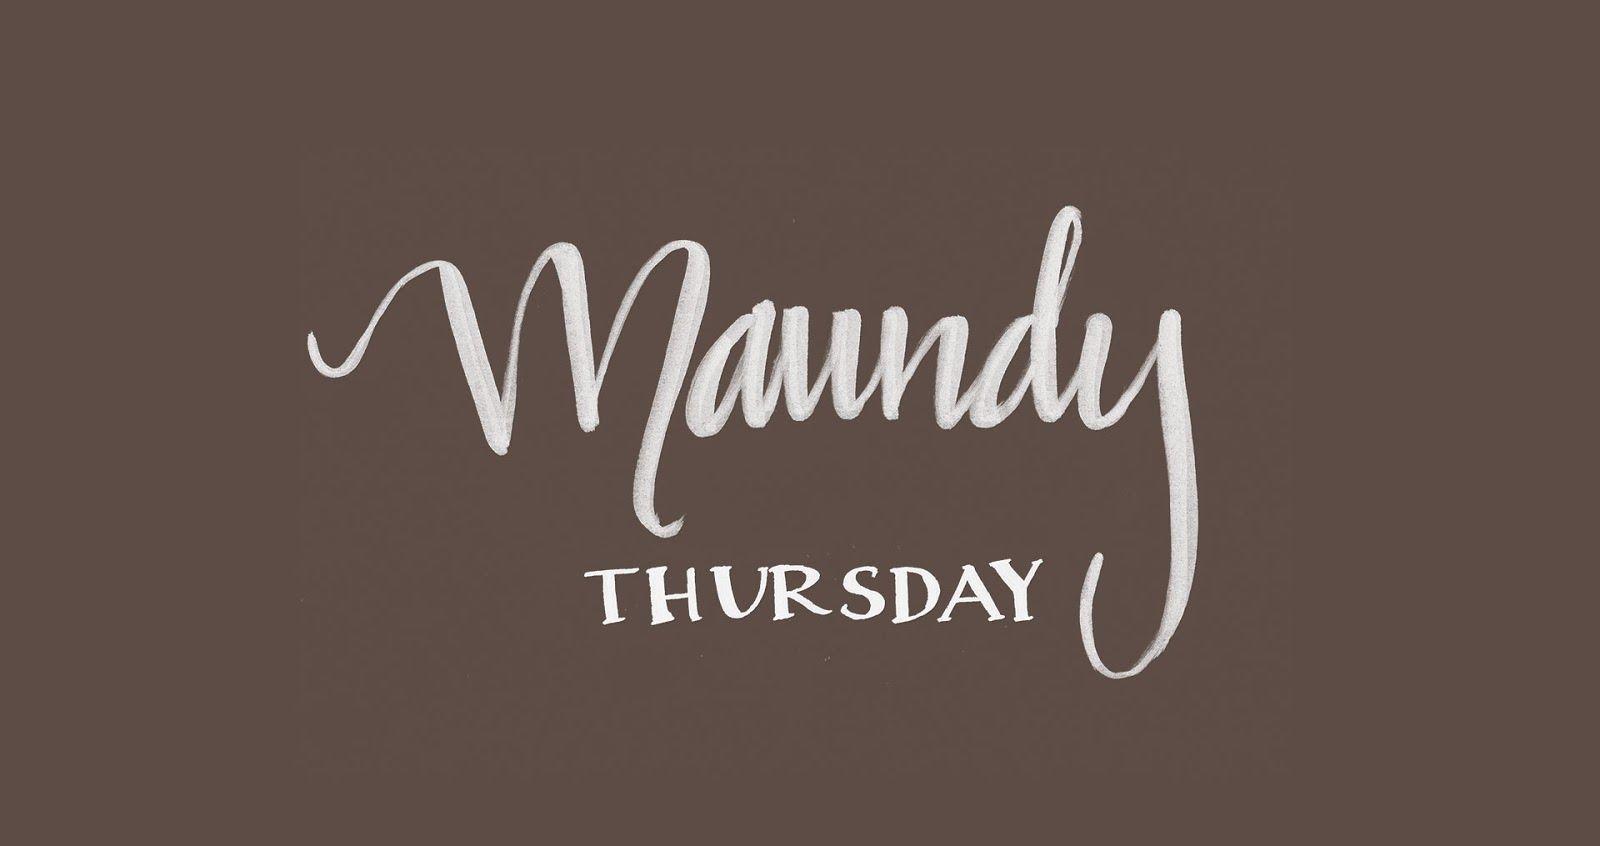 Festivals Of Life: Happy Maundy Thursday 2016 SMS, Image, Wallpaper